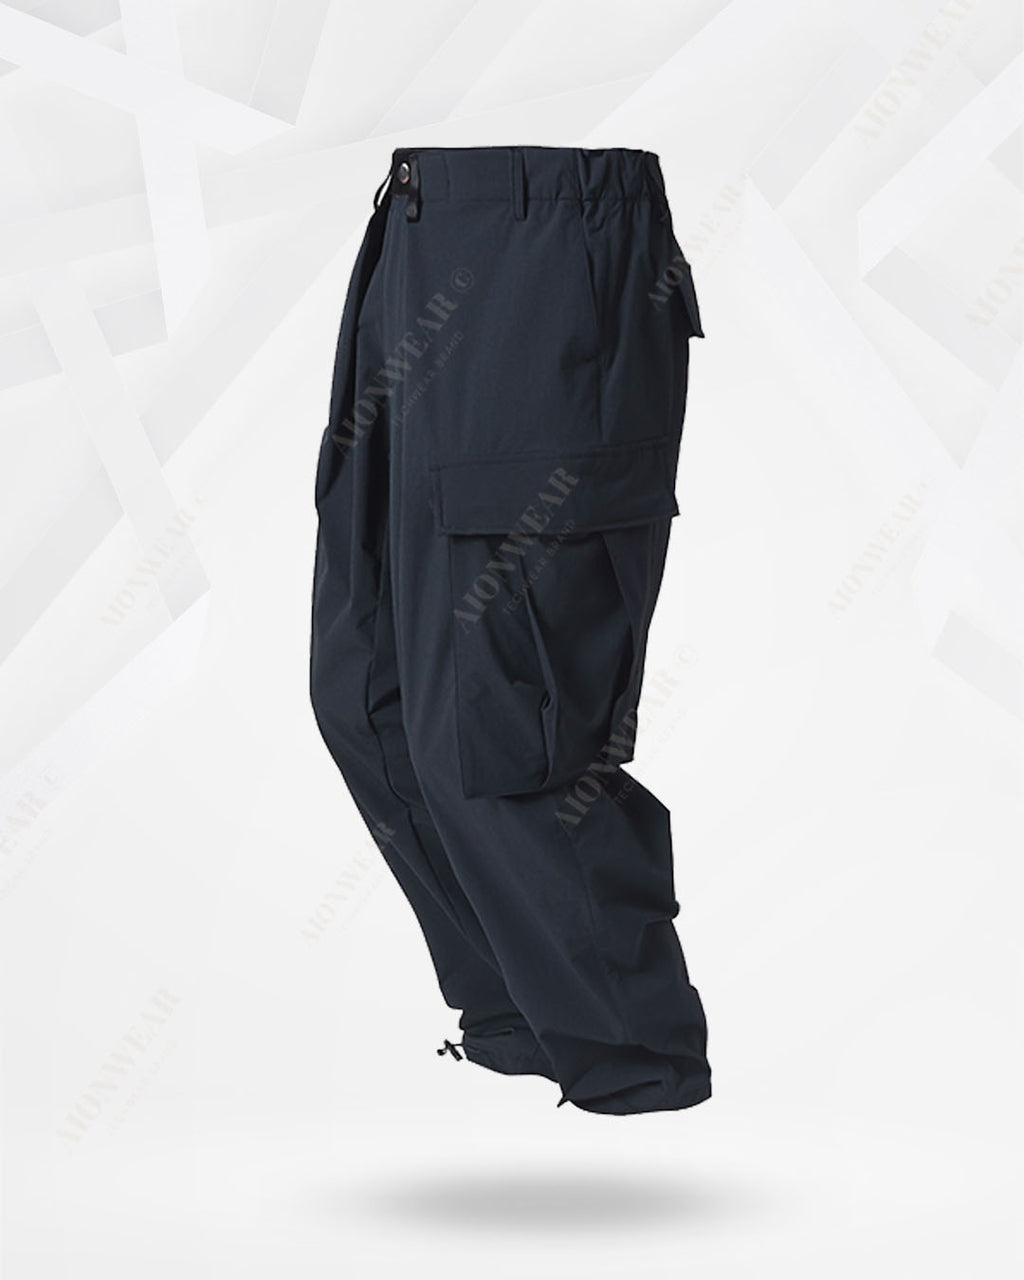 Tactical Black Cargo Pants for Outdoor Enthusiasts